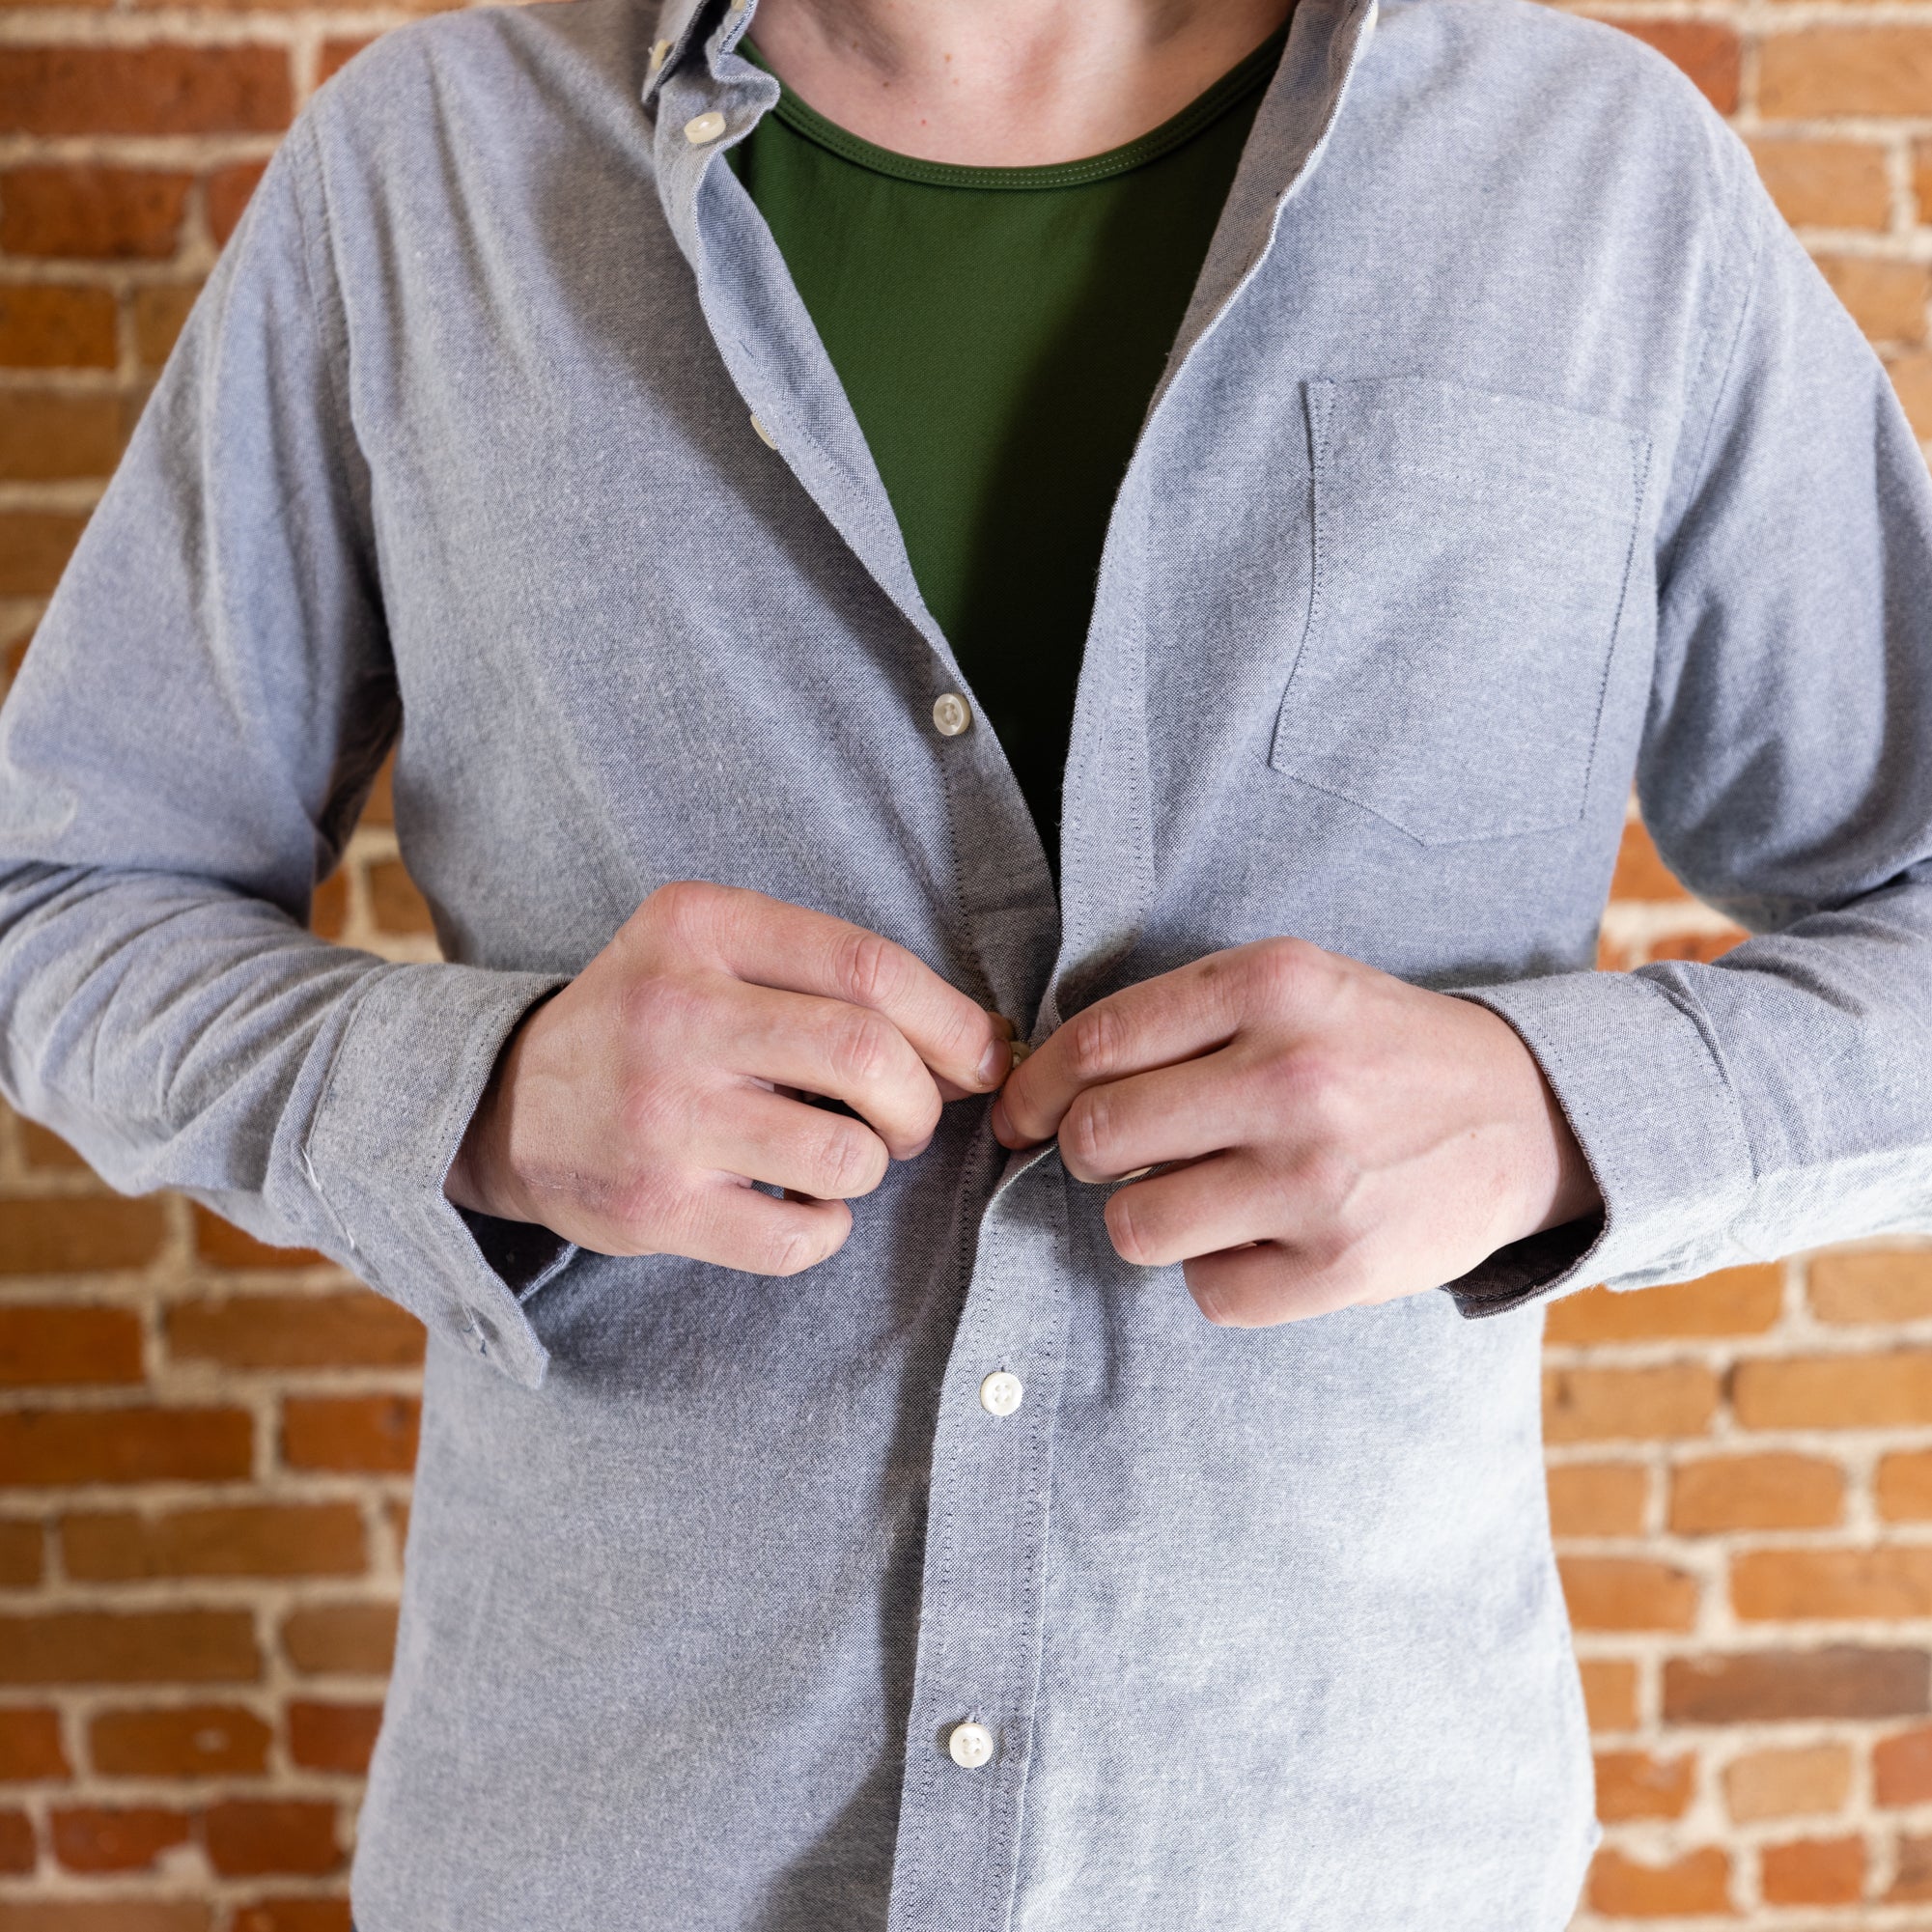 A white man buttons a light denim jacket over his olive-green tank top and denim jeans. He's by a brick background.